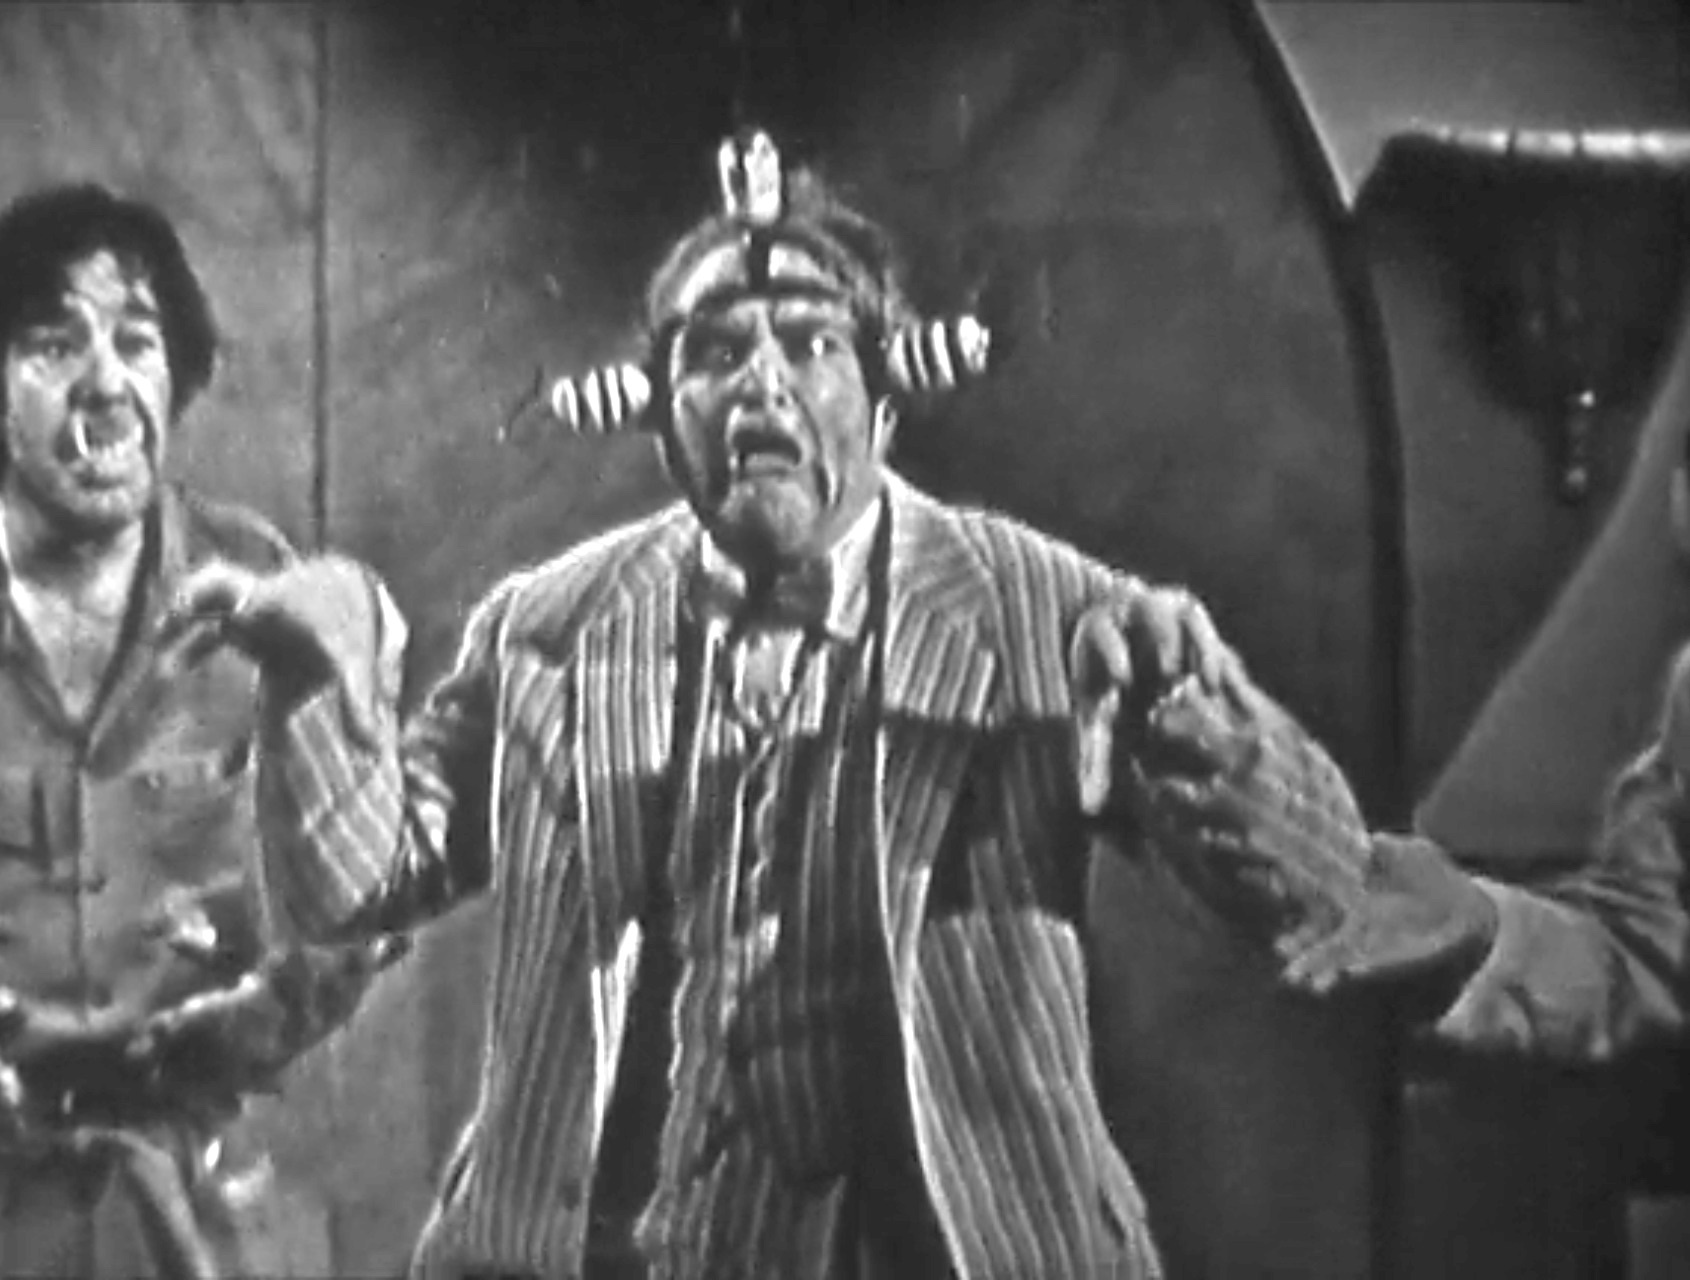 Clem Kadiddlehopper as a science experiment! in Dial 'B' for Brush -- a Halloween episode of The Red Skelton Show